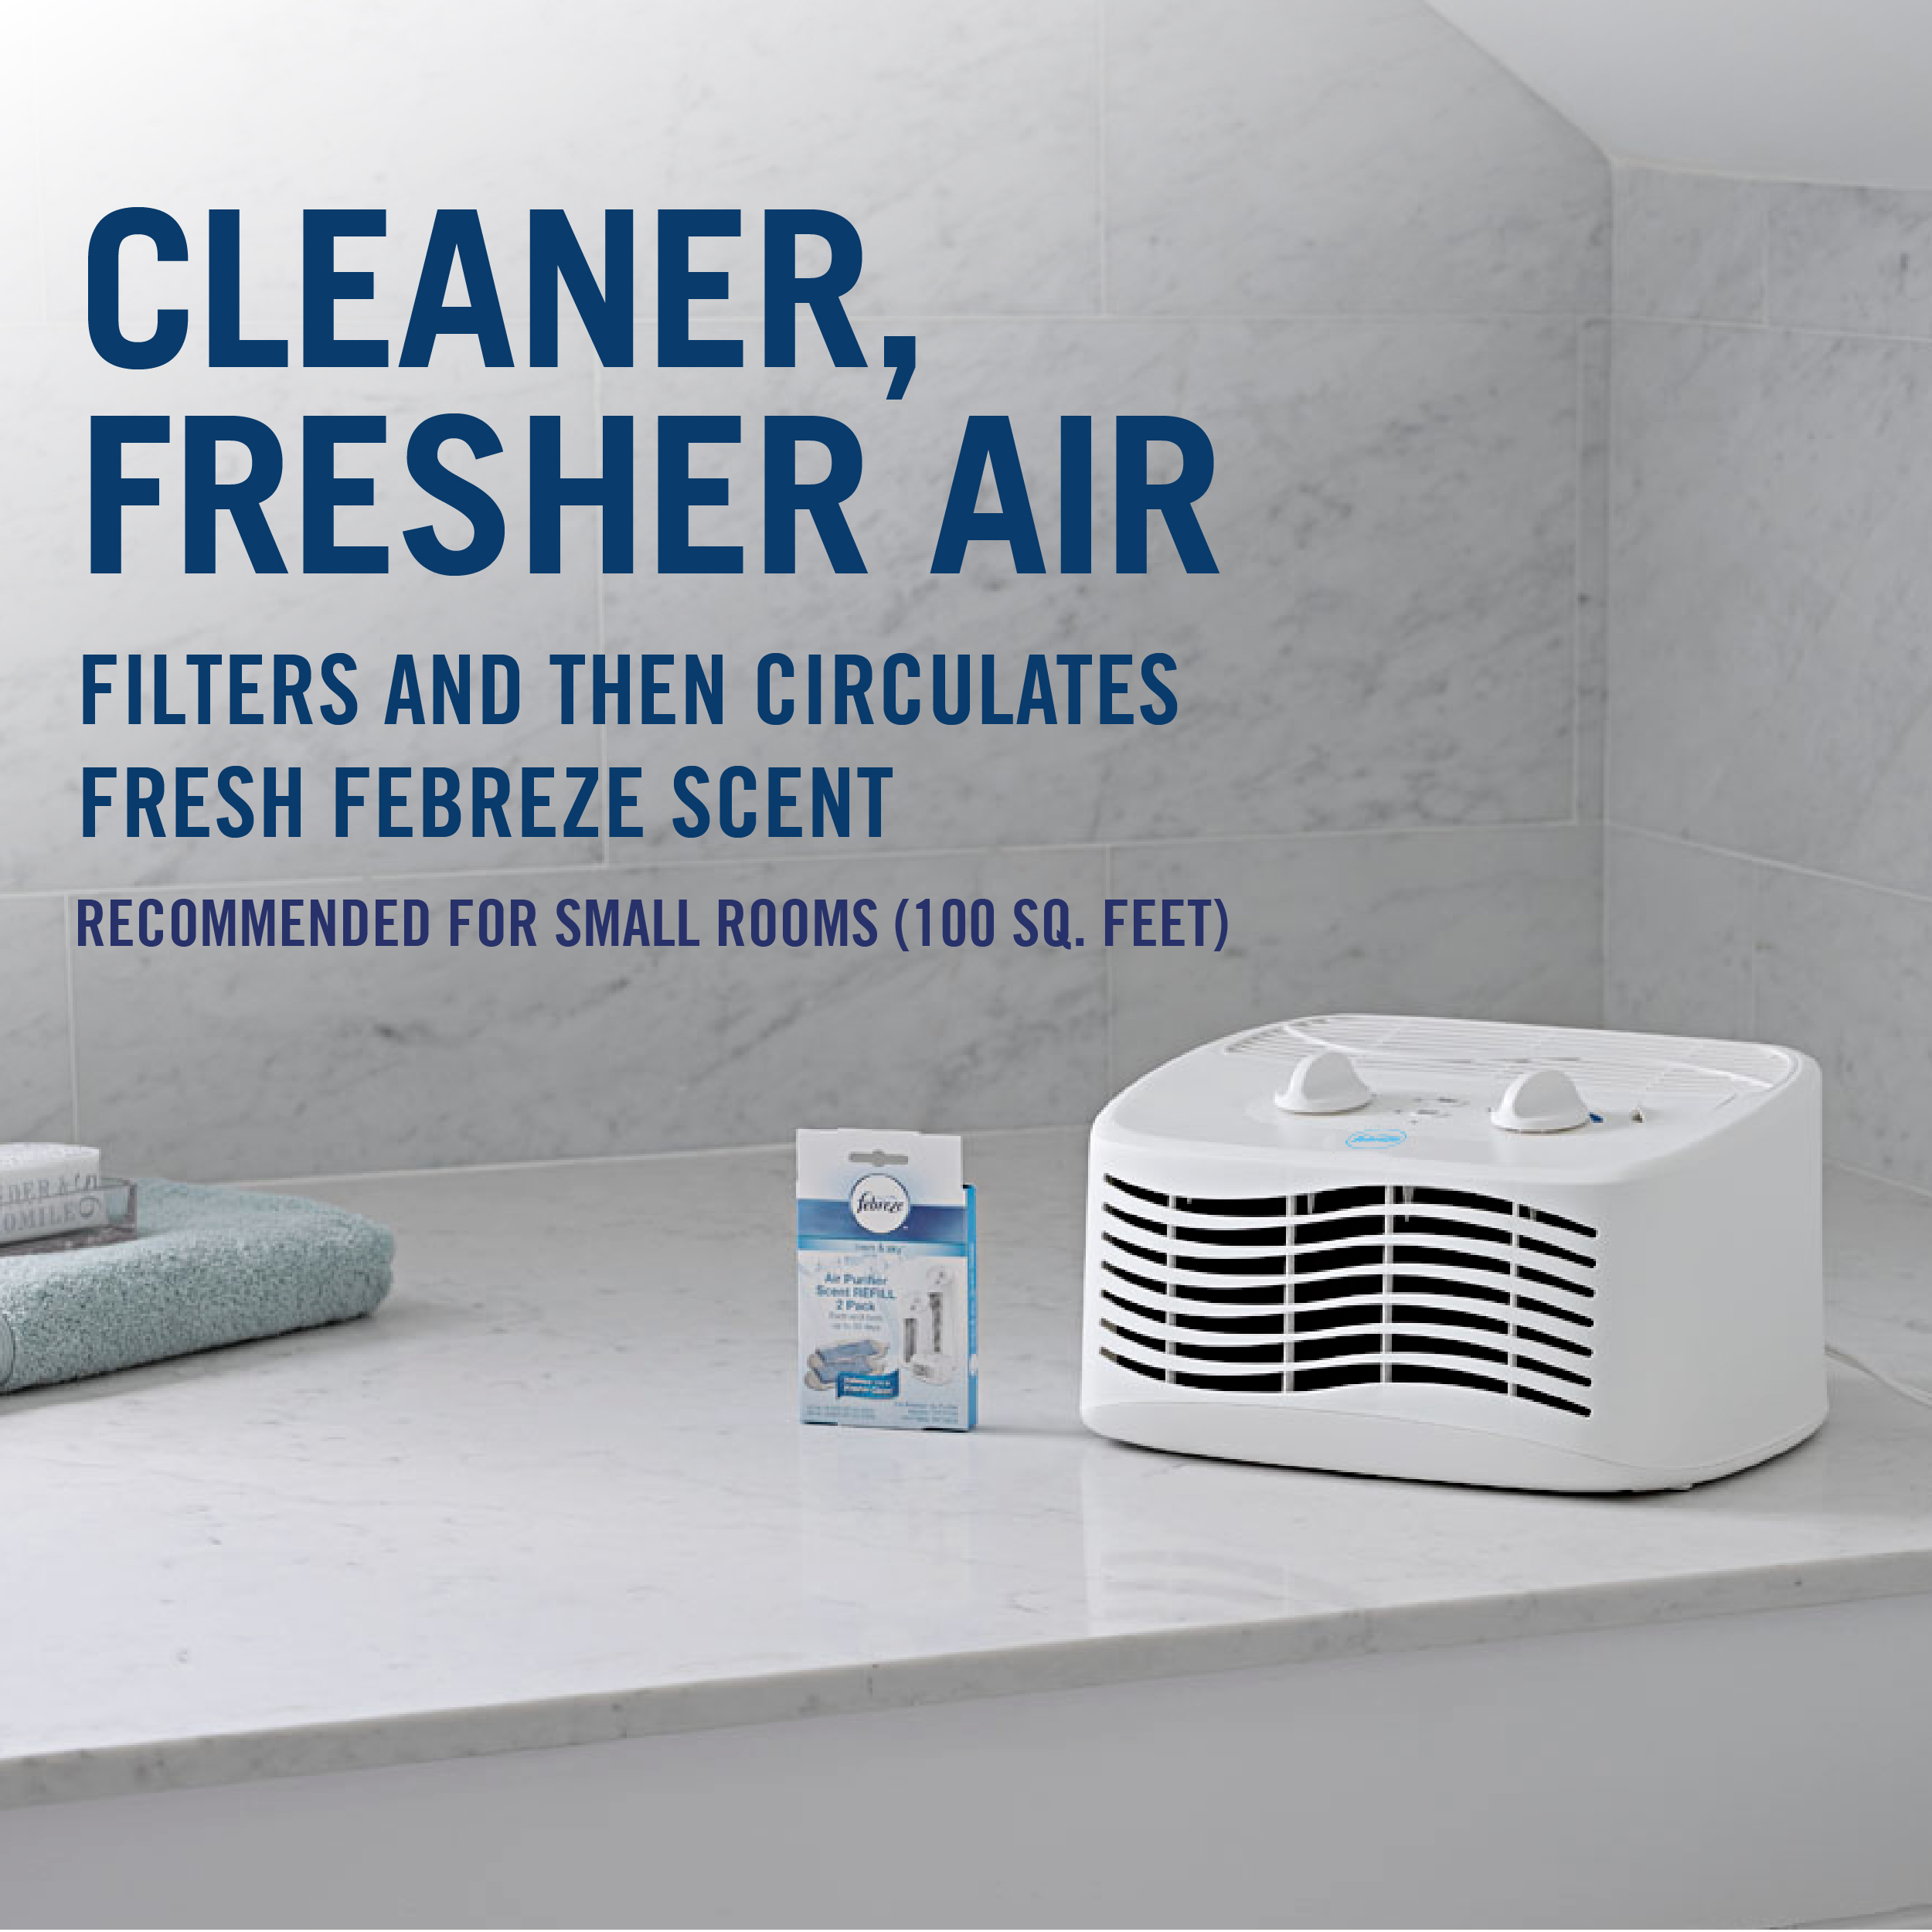 Febreze Tabletop HEPA-Type Air Purifier FHT170W, White - image 3 of 12